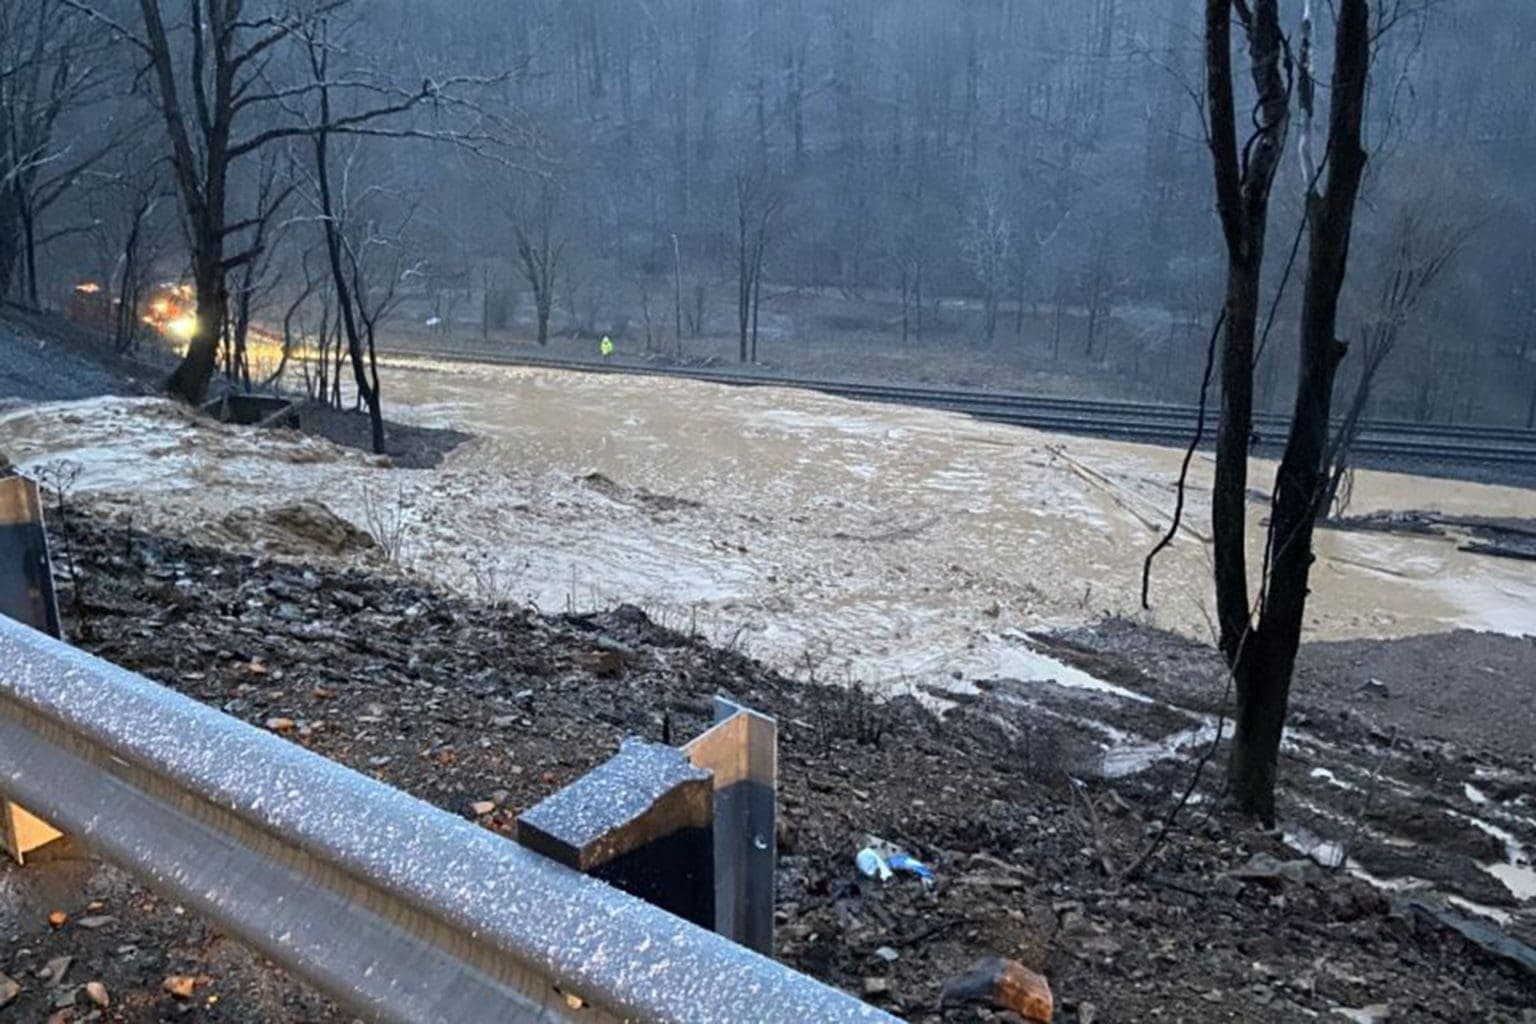 High water and mud slides causing road closures across southern West